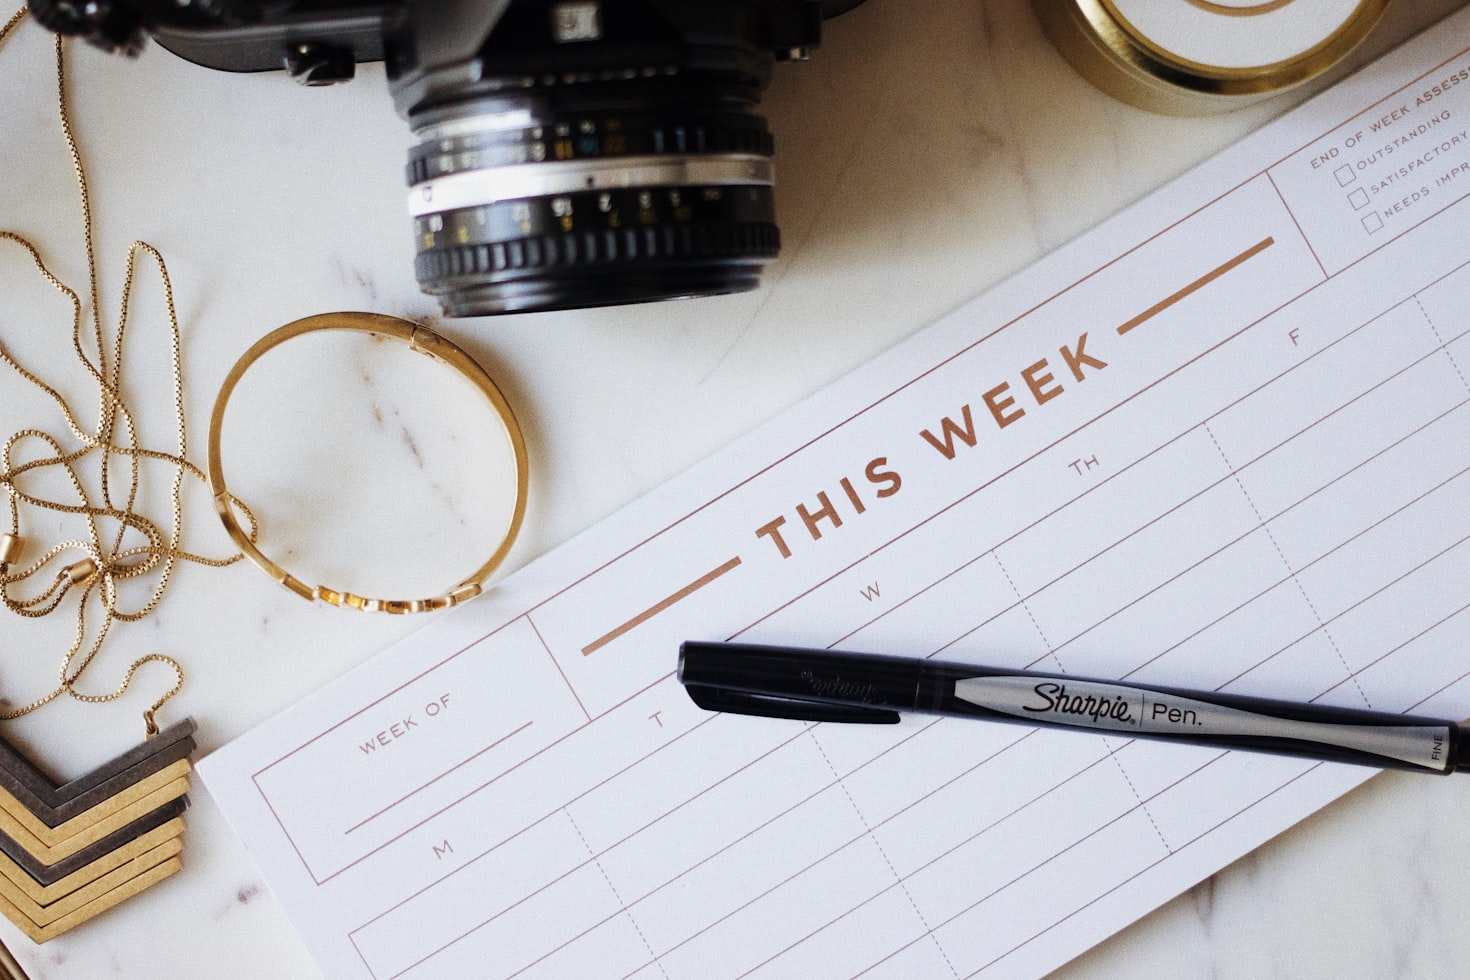 A weekly calendar, sharpie, jewelry, and a camera all sitting on a table top.